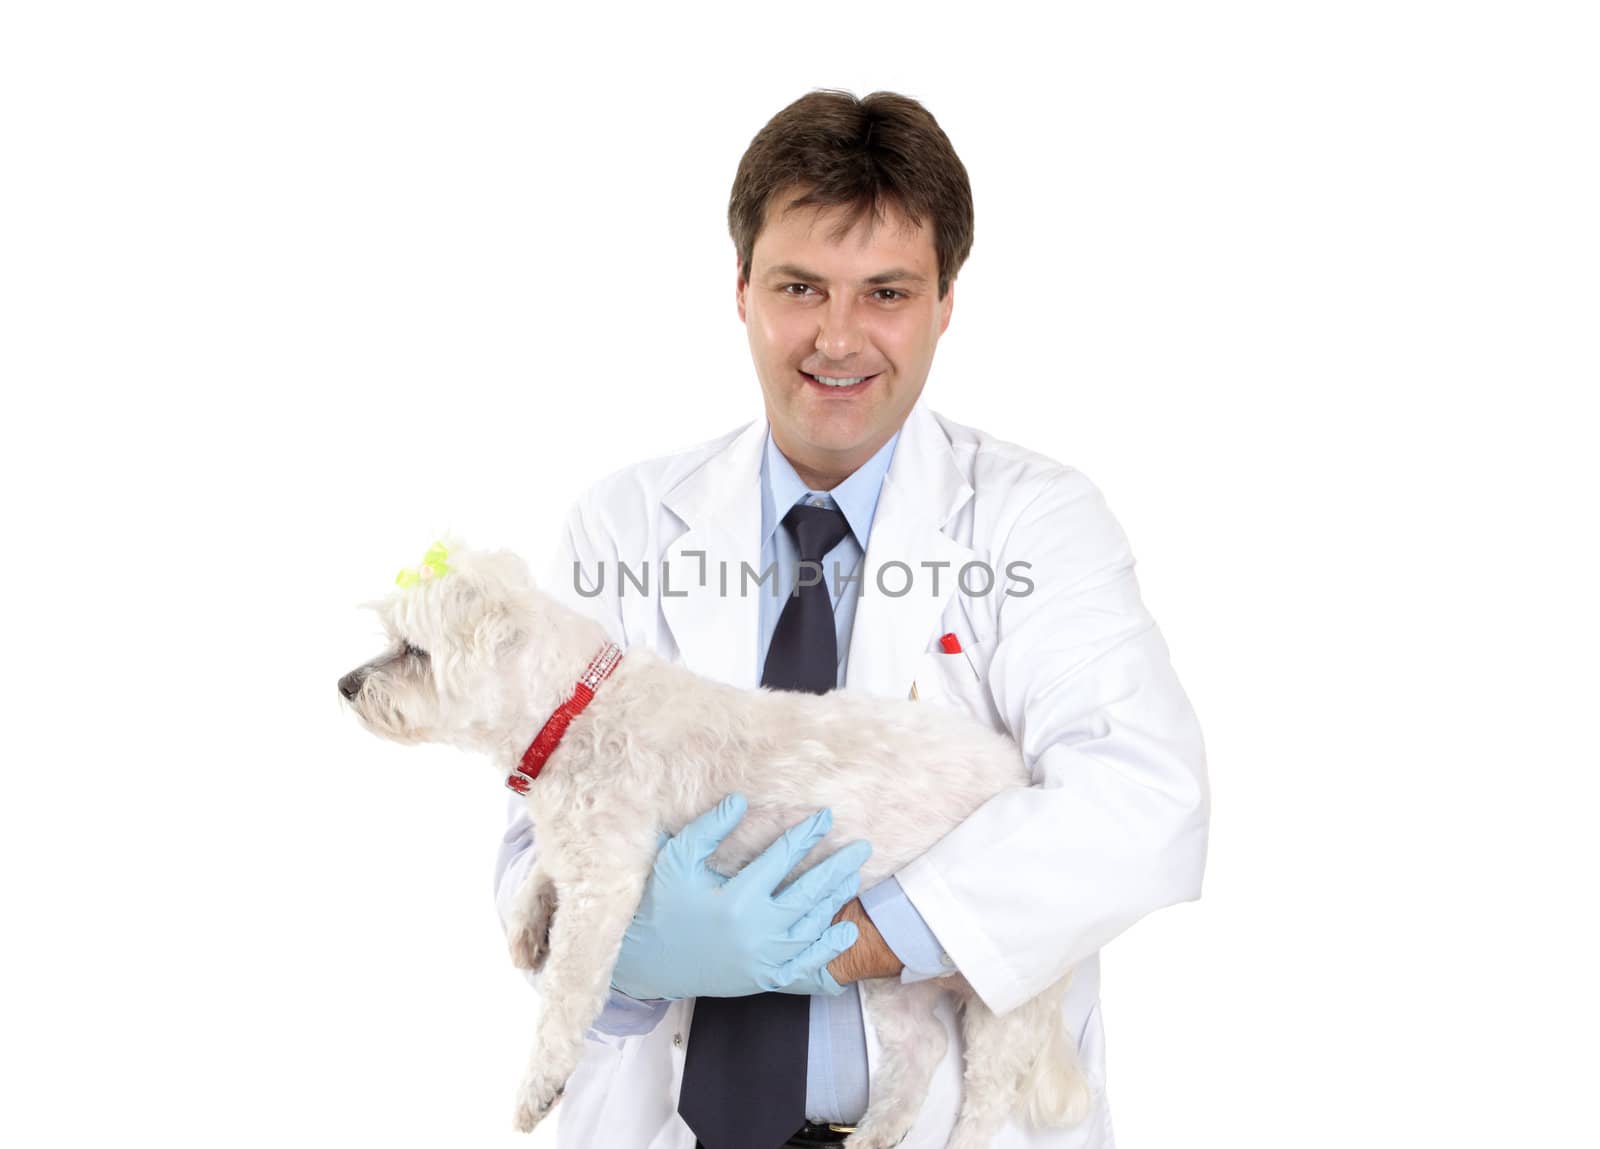 A smiling veterinarian carries a pet maltese terrier dog in his arms.